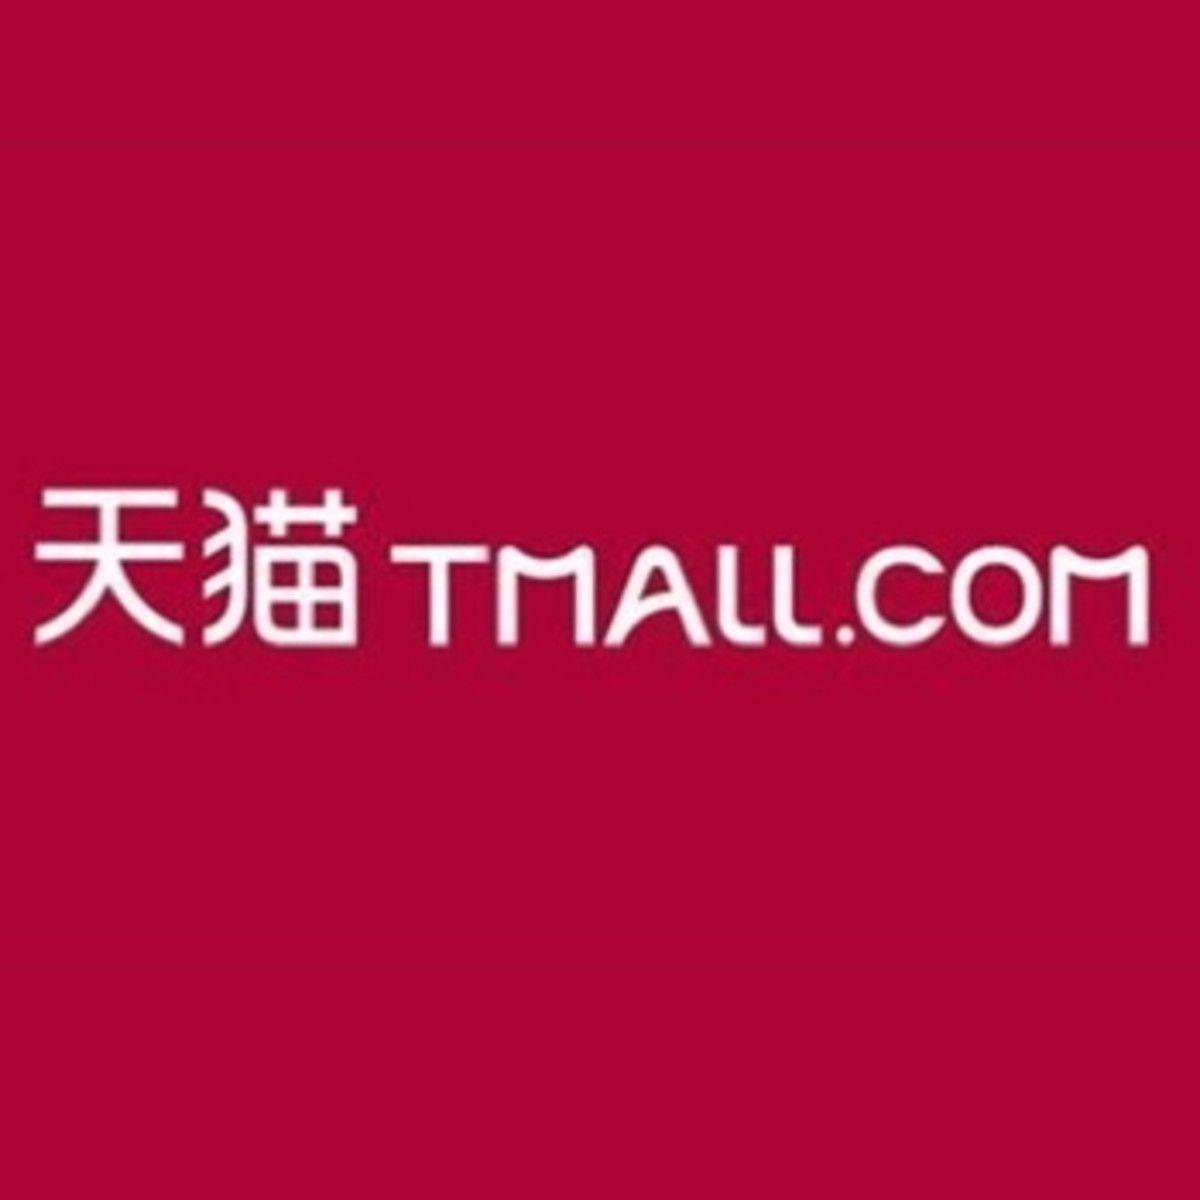 Tmall Logo - Apple bolsters its Chinese retail offering with official Tmall store ...